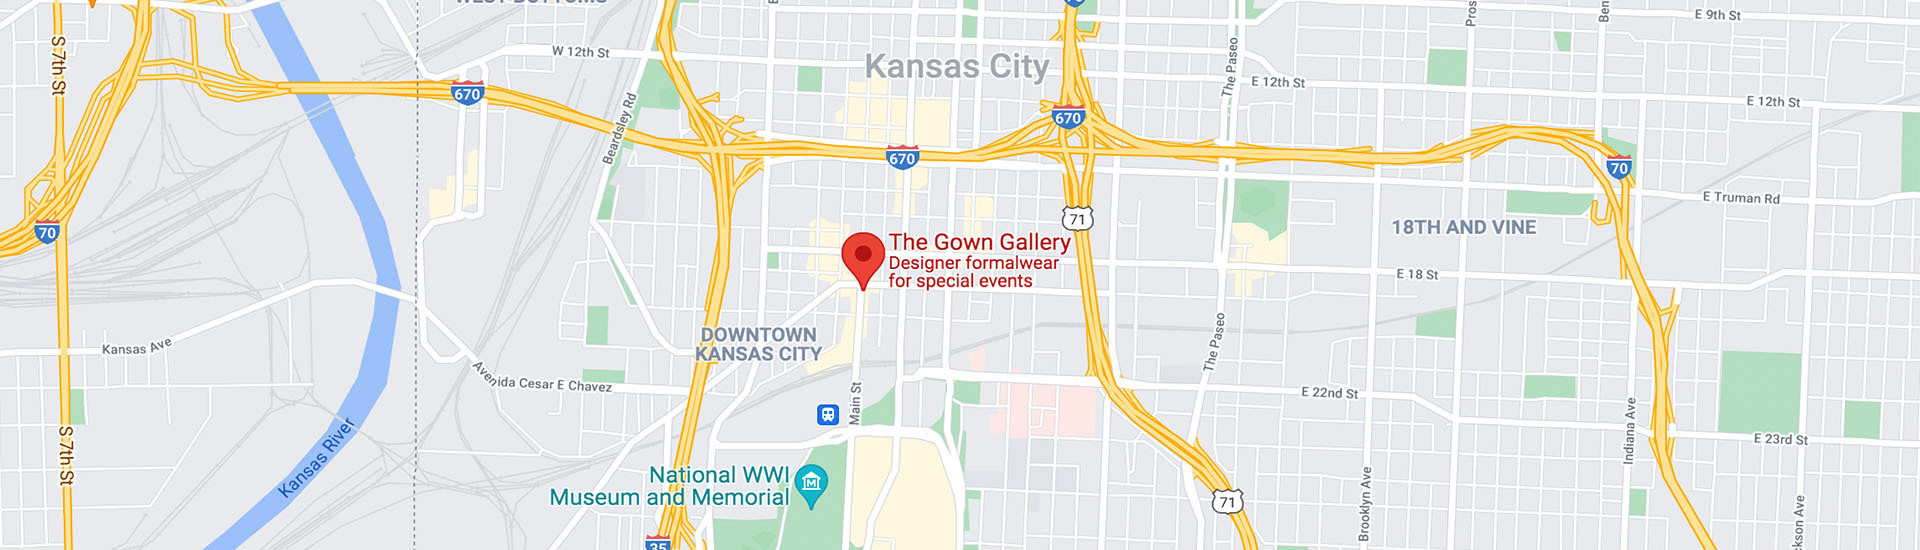 The Gown Gallery location